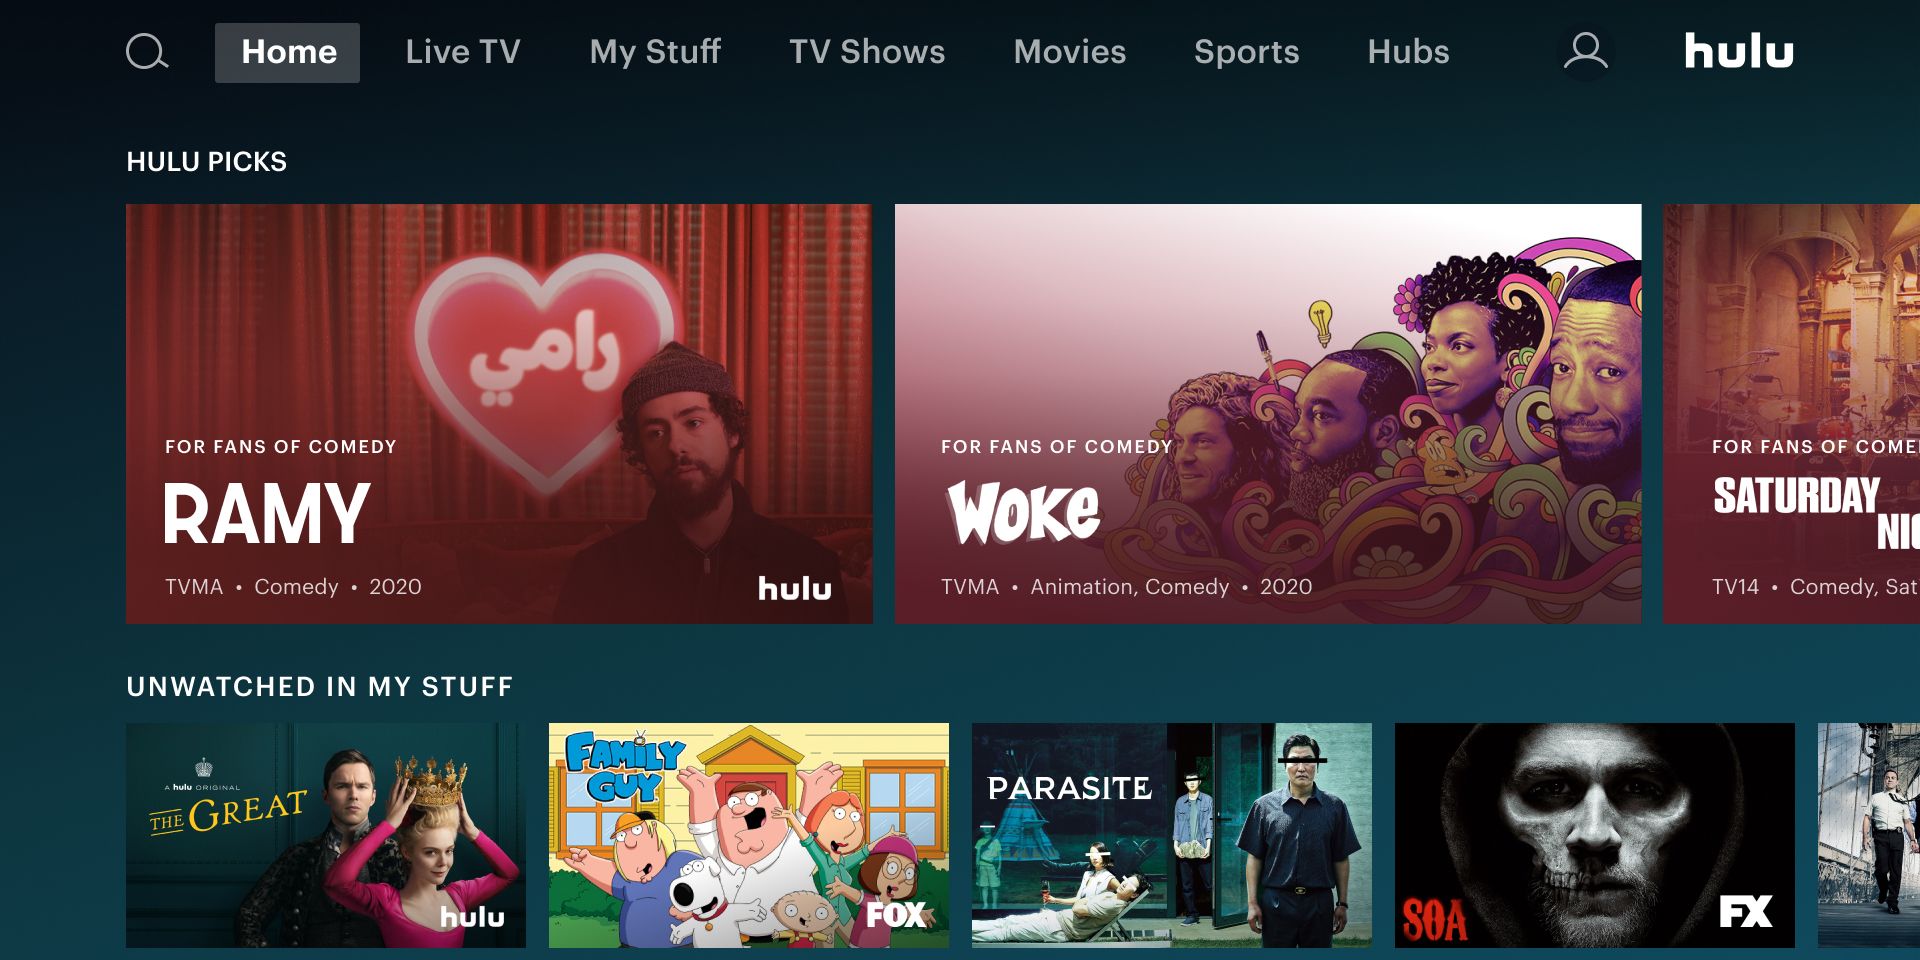 How To Update Hulu On A Samsung Smart TV